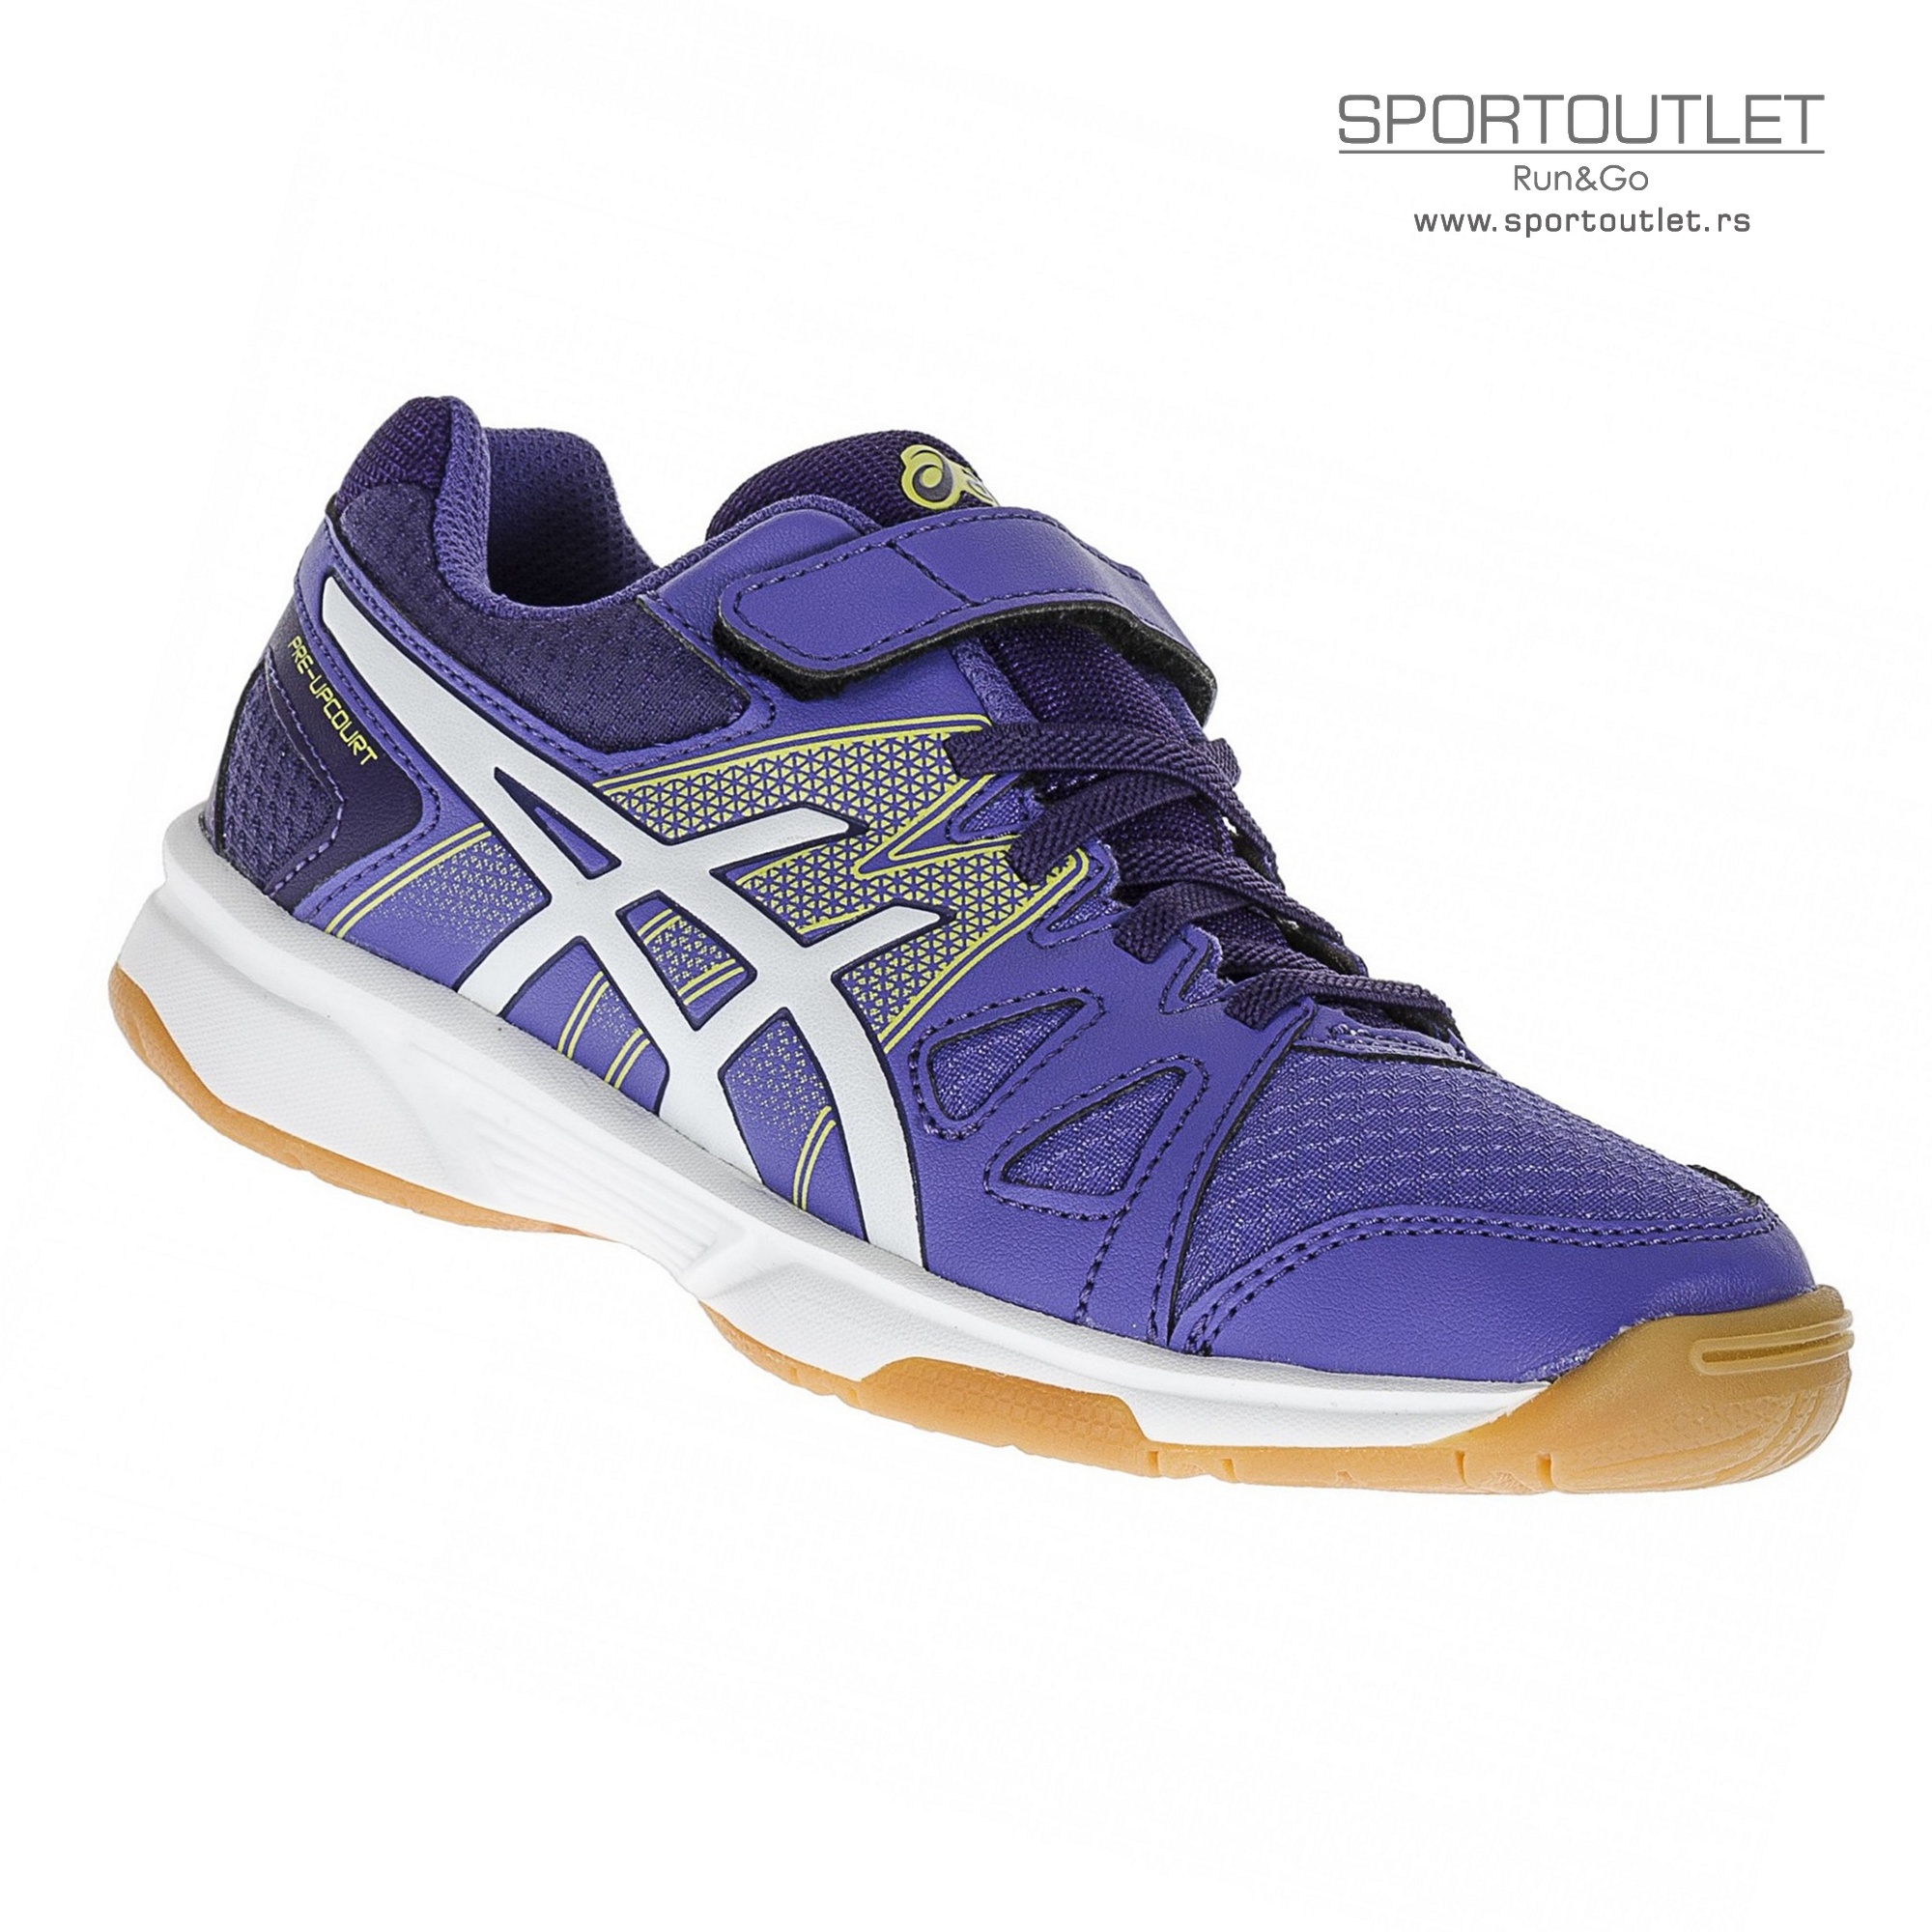 asics patike outlet - 56% OFF 